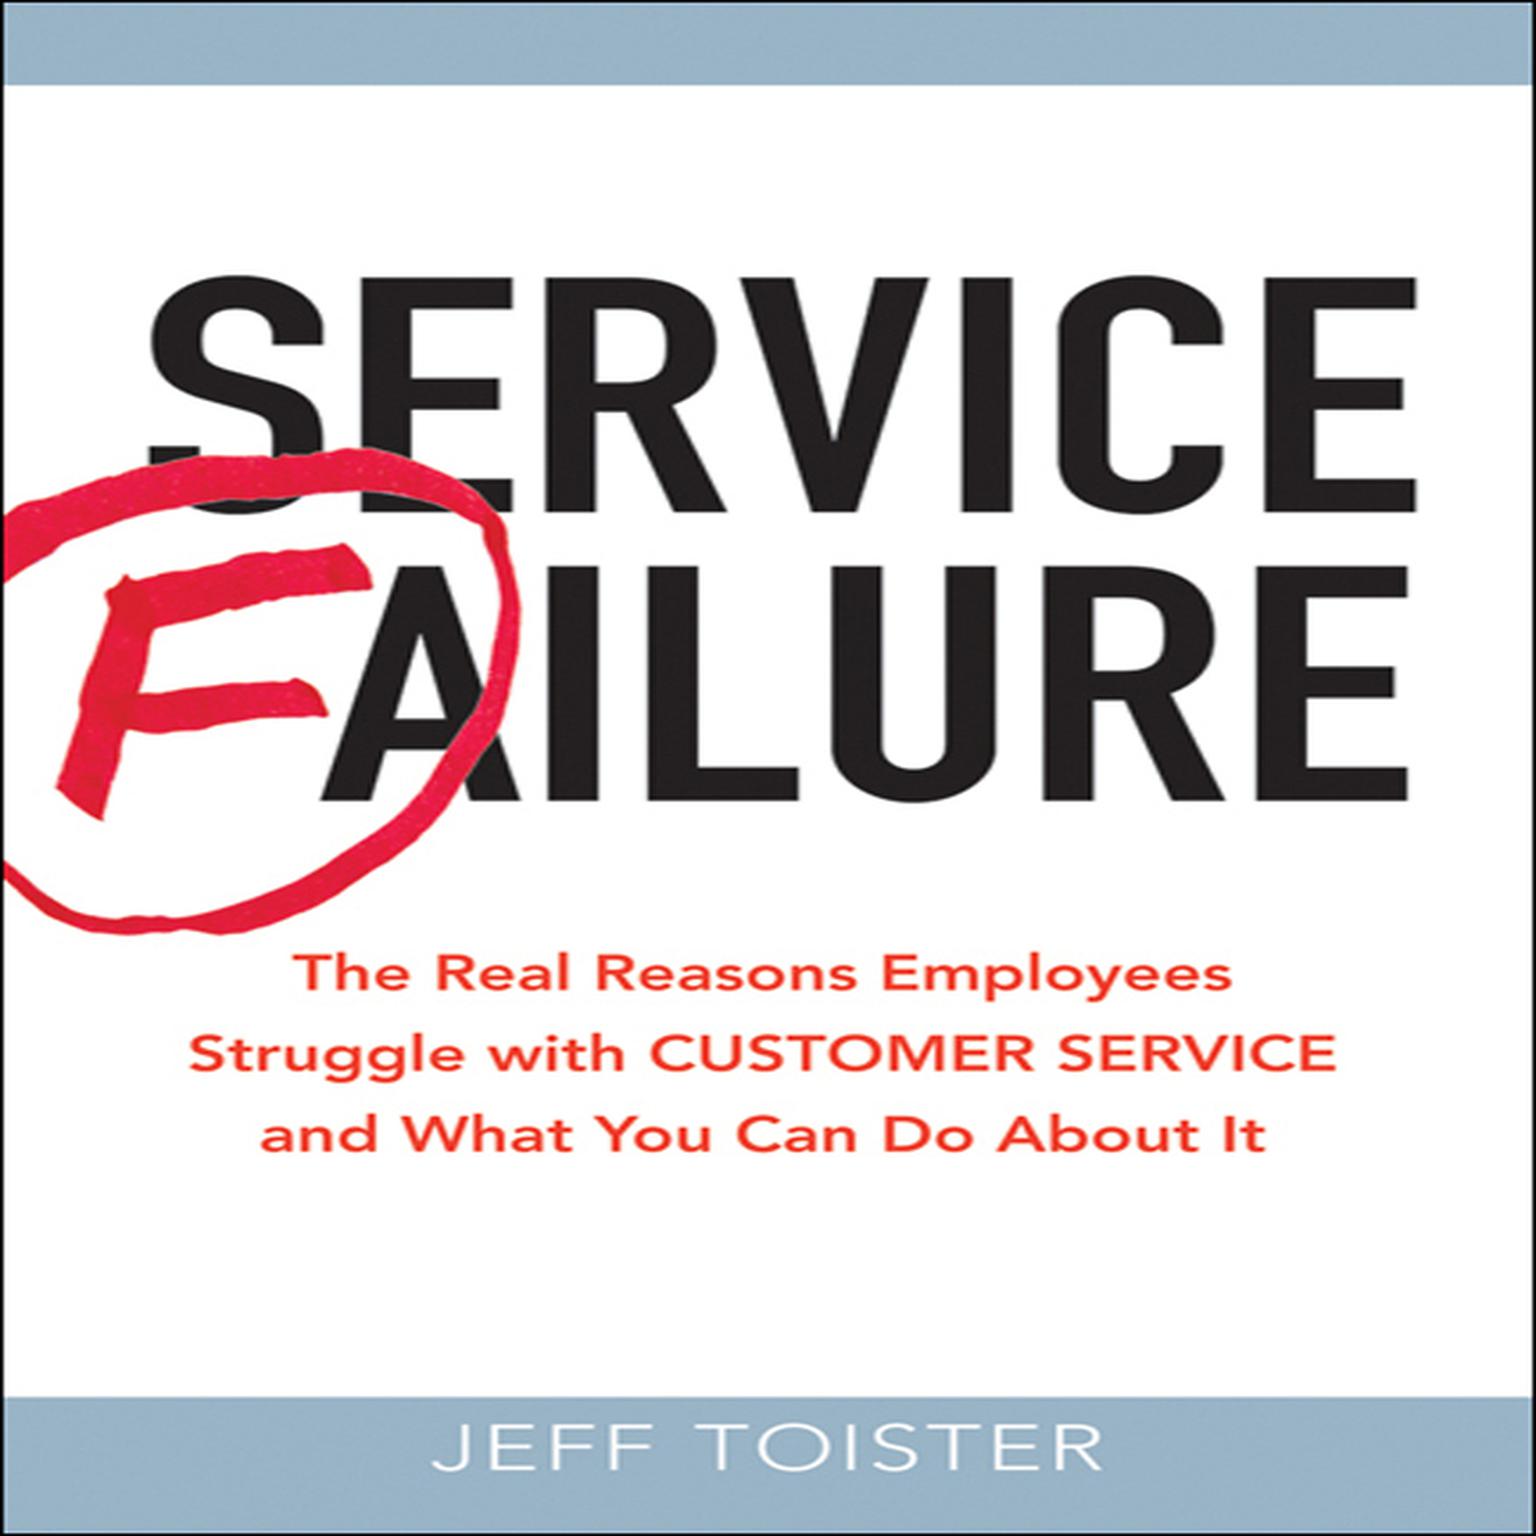 Service Failure: The Real Reasons Employees Struggle with Customer Service and What You Can Do About It Audiobook, by Jeff Toister